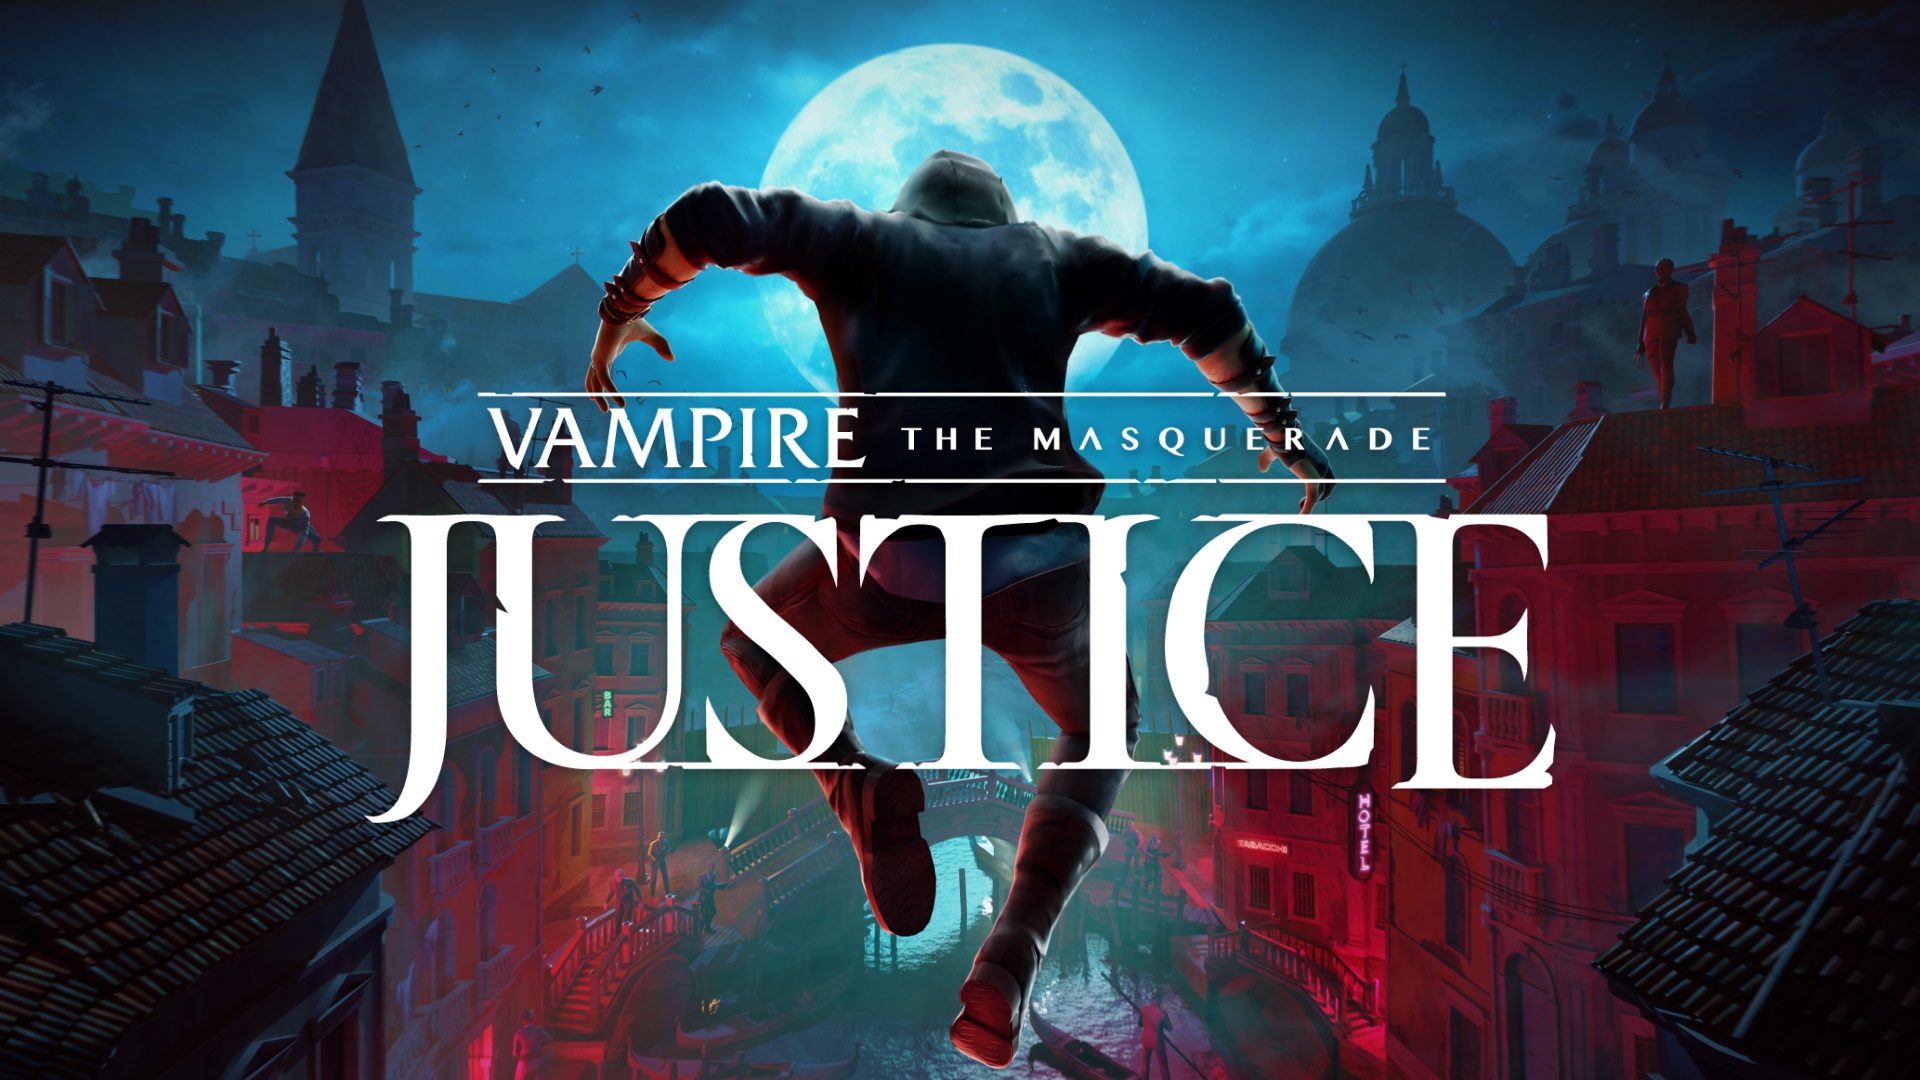 Vampire: The Masquerade – Justice announced for VR